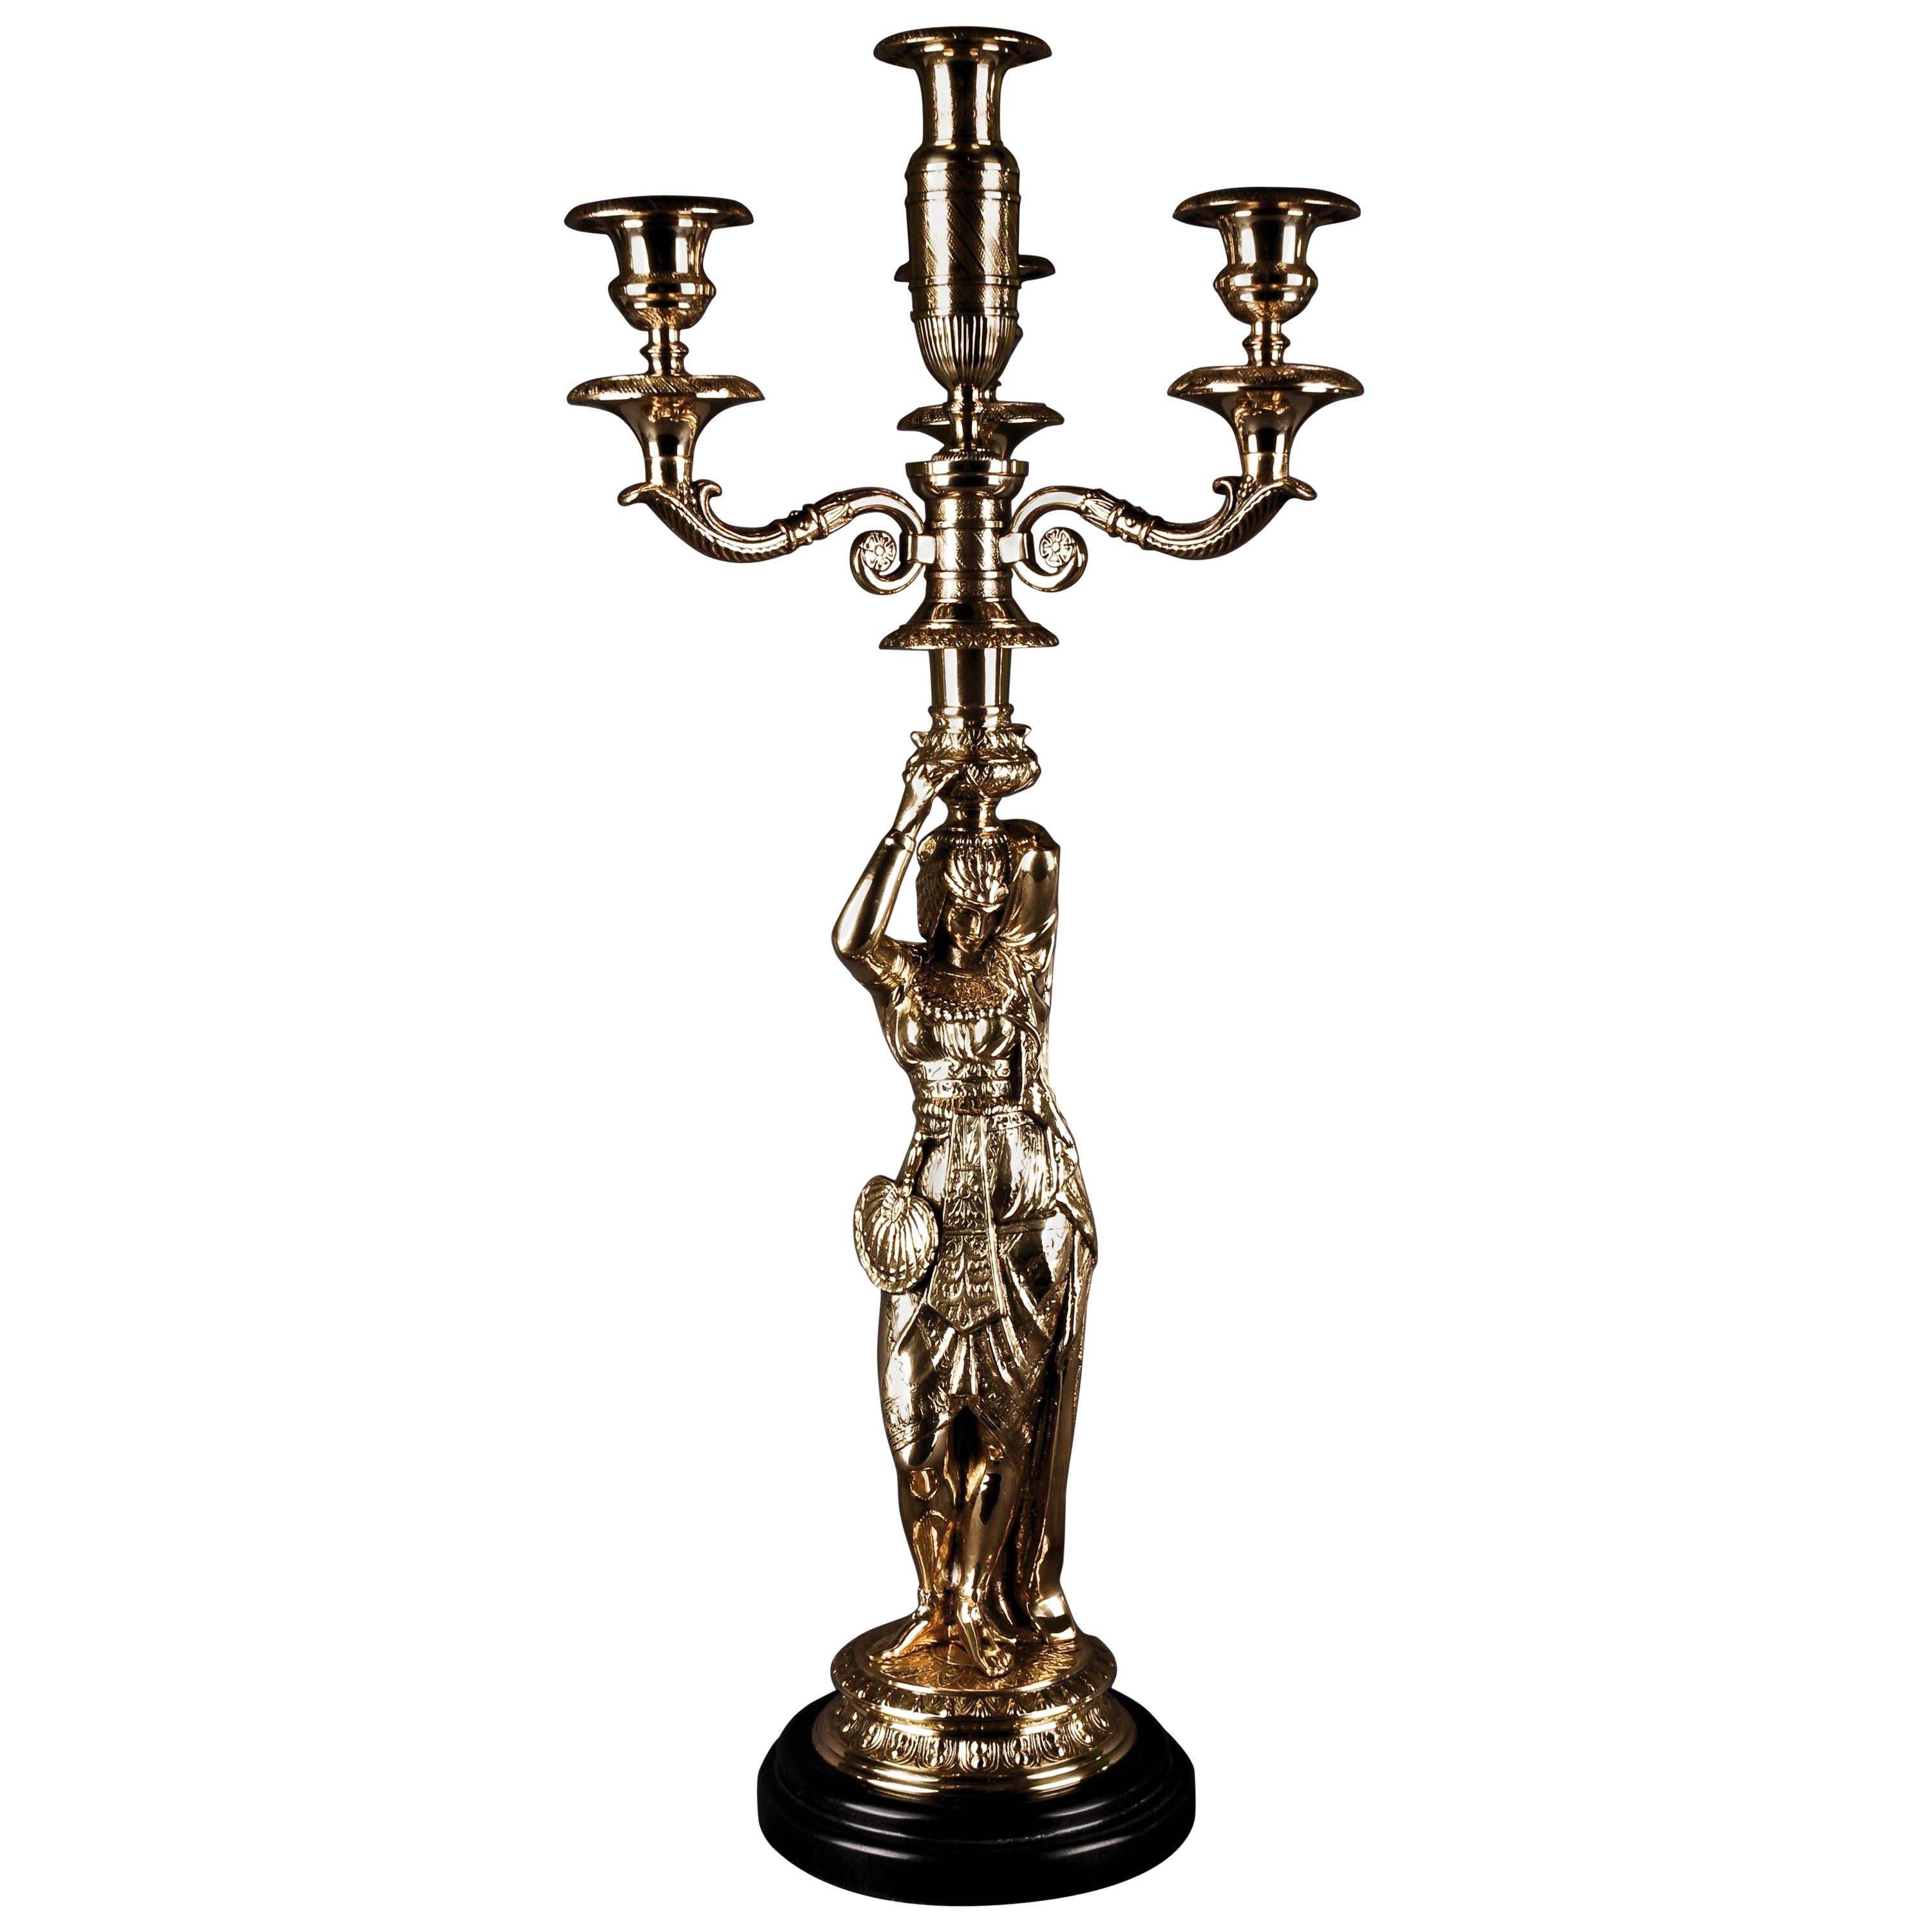 20th Century Empire Style Figure-Formed Candelabra